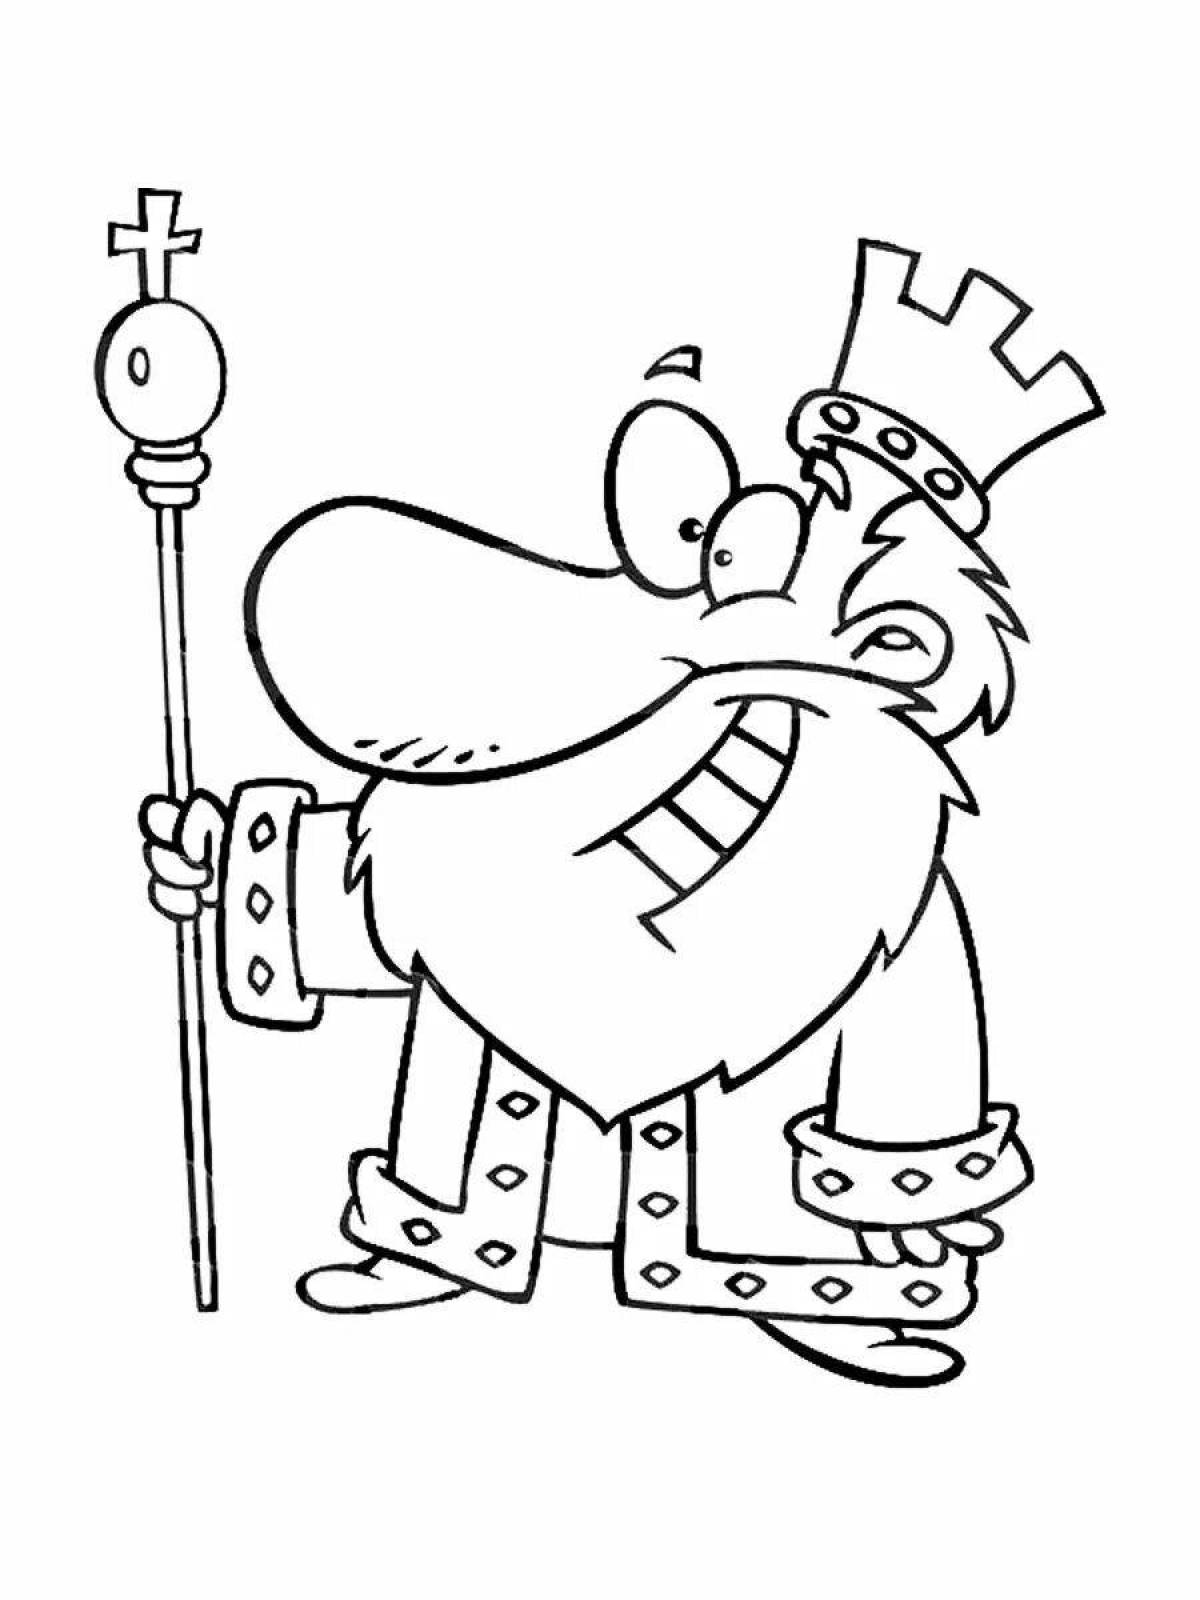 Fairy king coloring pages for kids